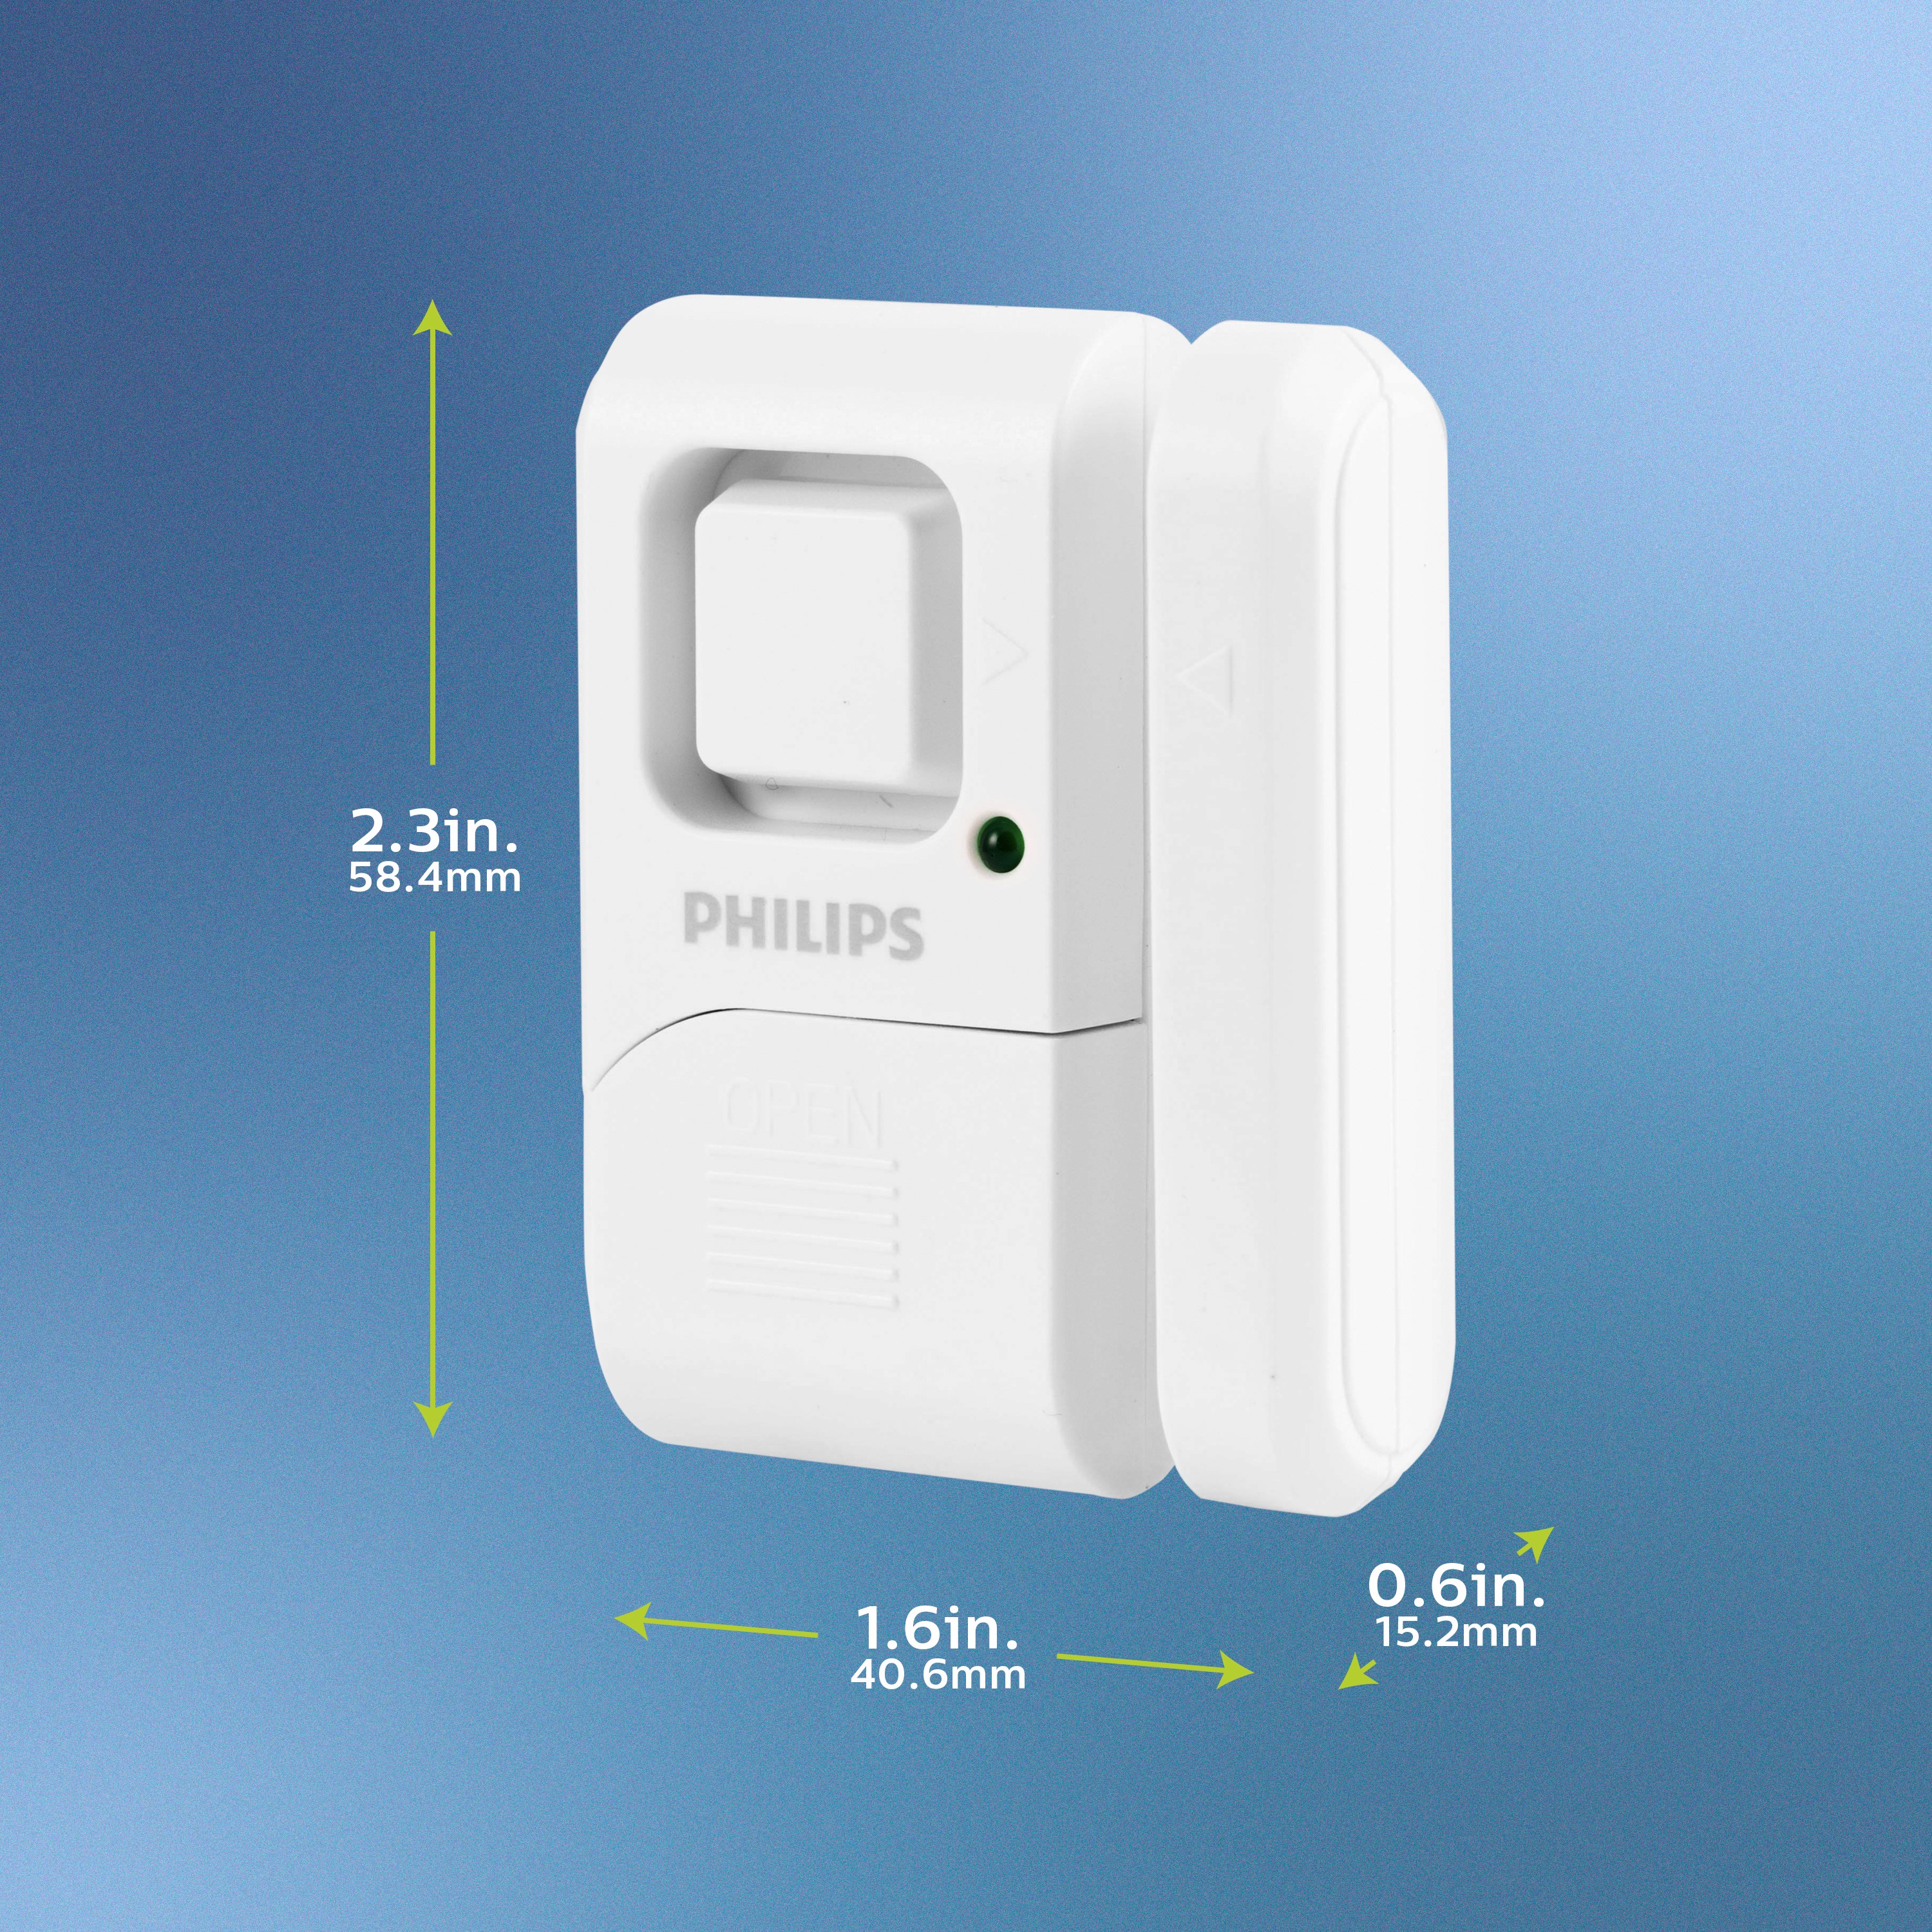 Philips Personal Security Window and Door Alarm, 4-Pack, White - image 4 of 9